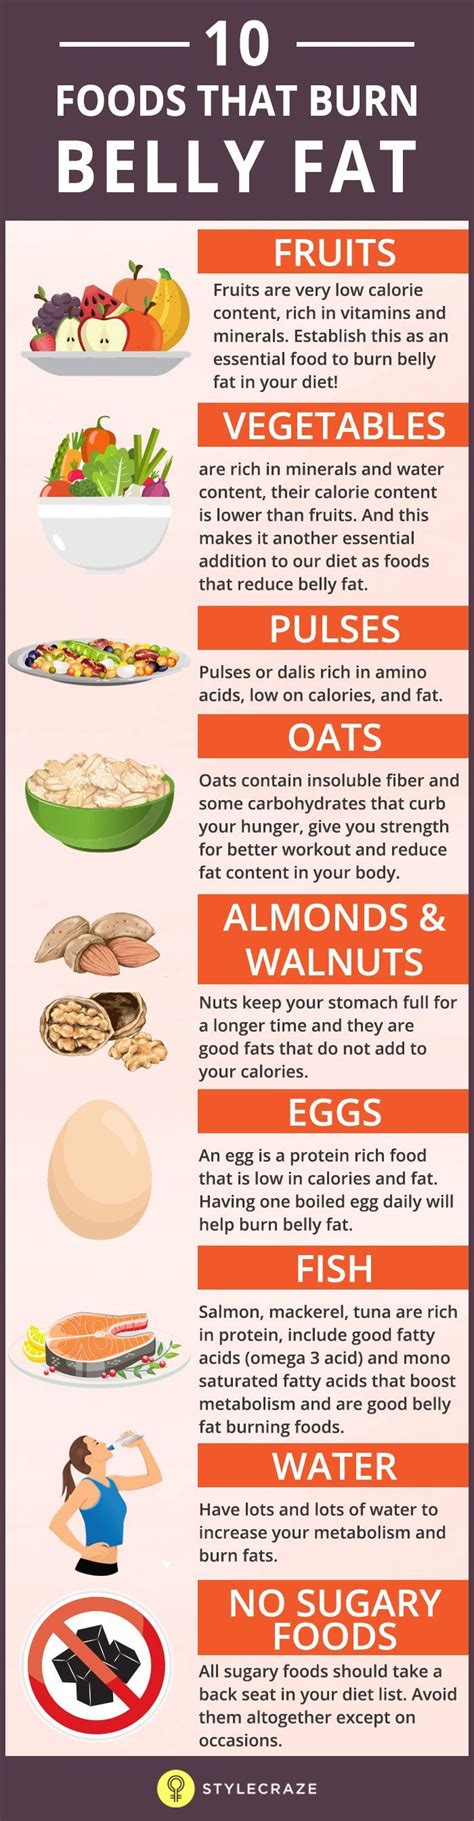 Belly Fat Fighting Foods List